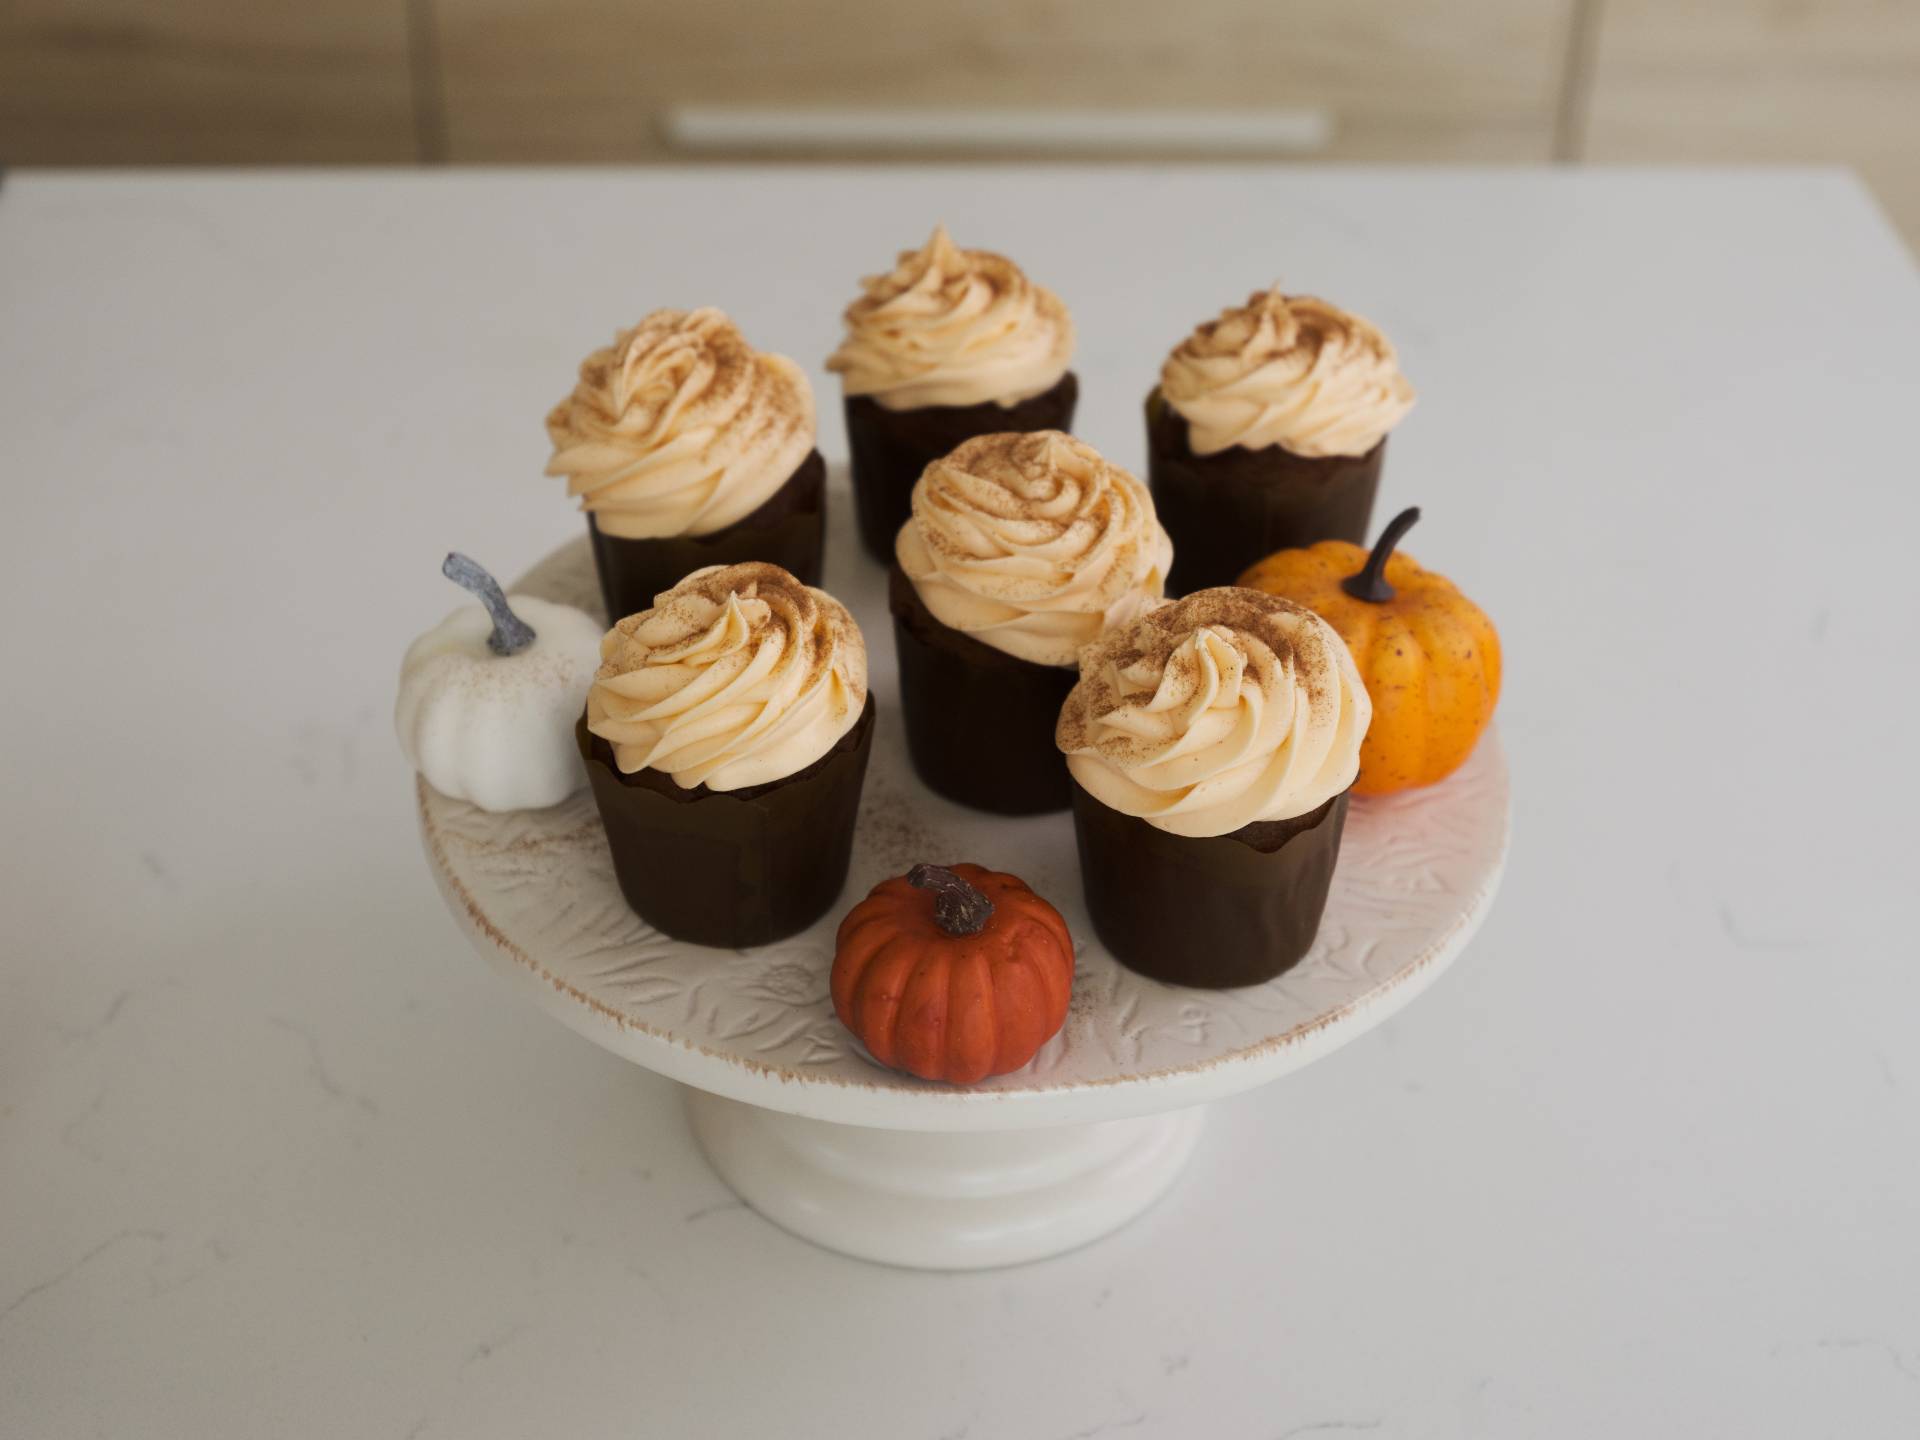  - Pumpkin Spiced Cupcakes With Cream Cheese Frosting